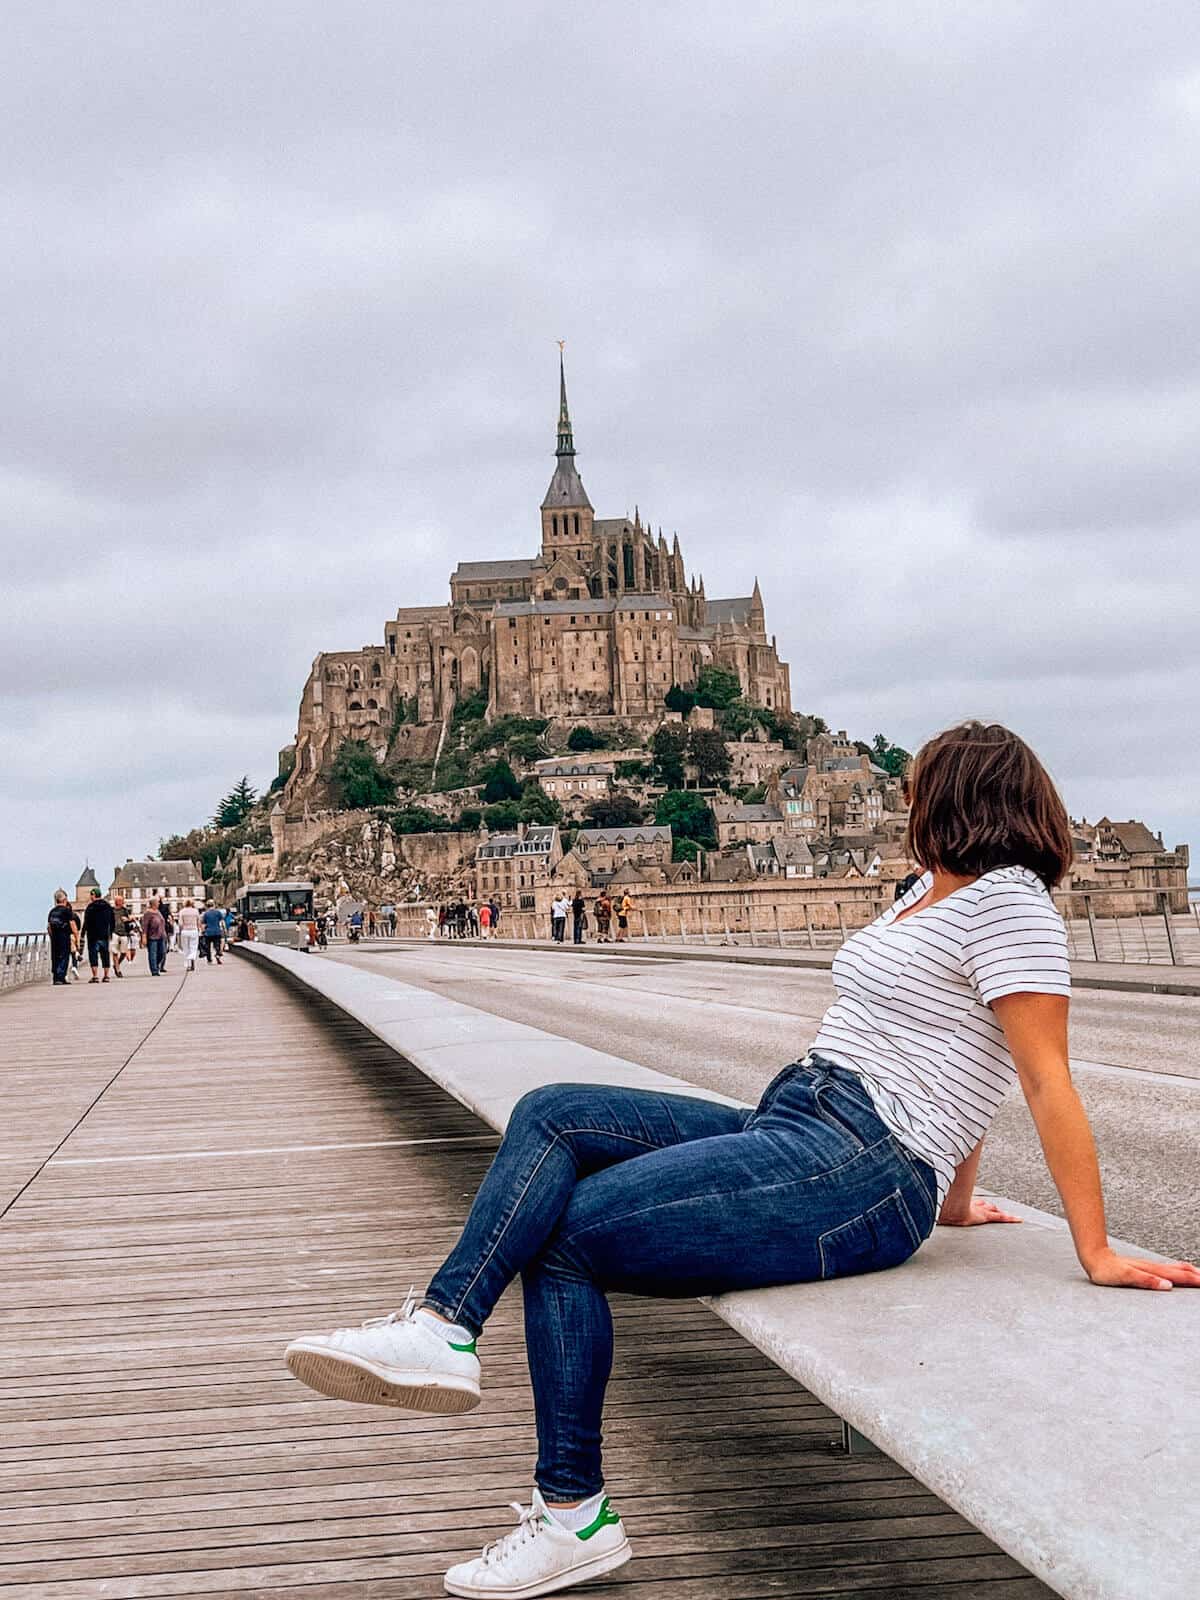 How to Get to Mont St Michel - Kat sitting on way to Mont St Michel